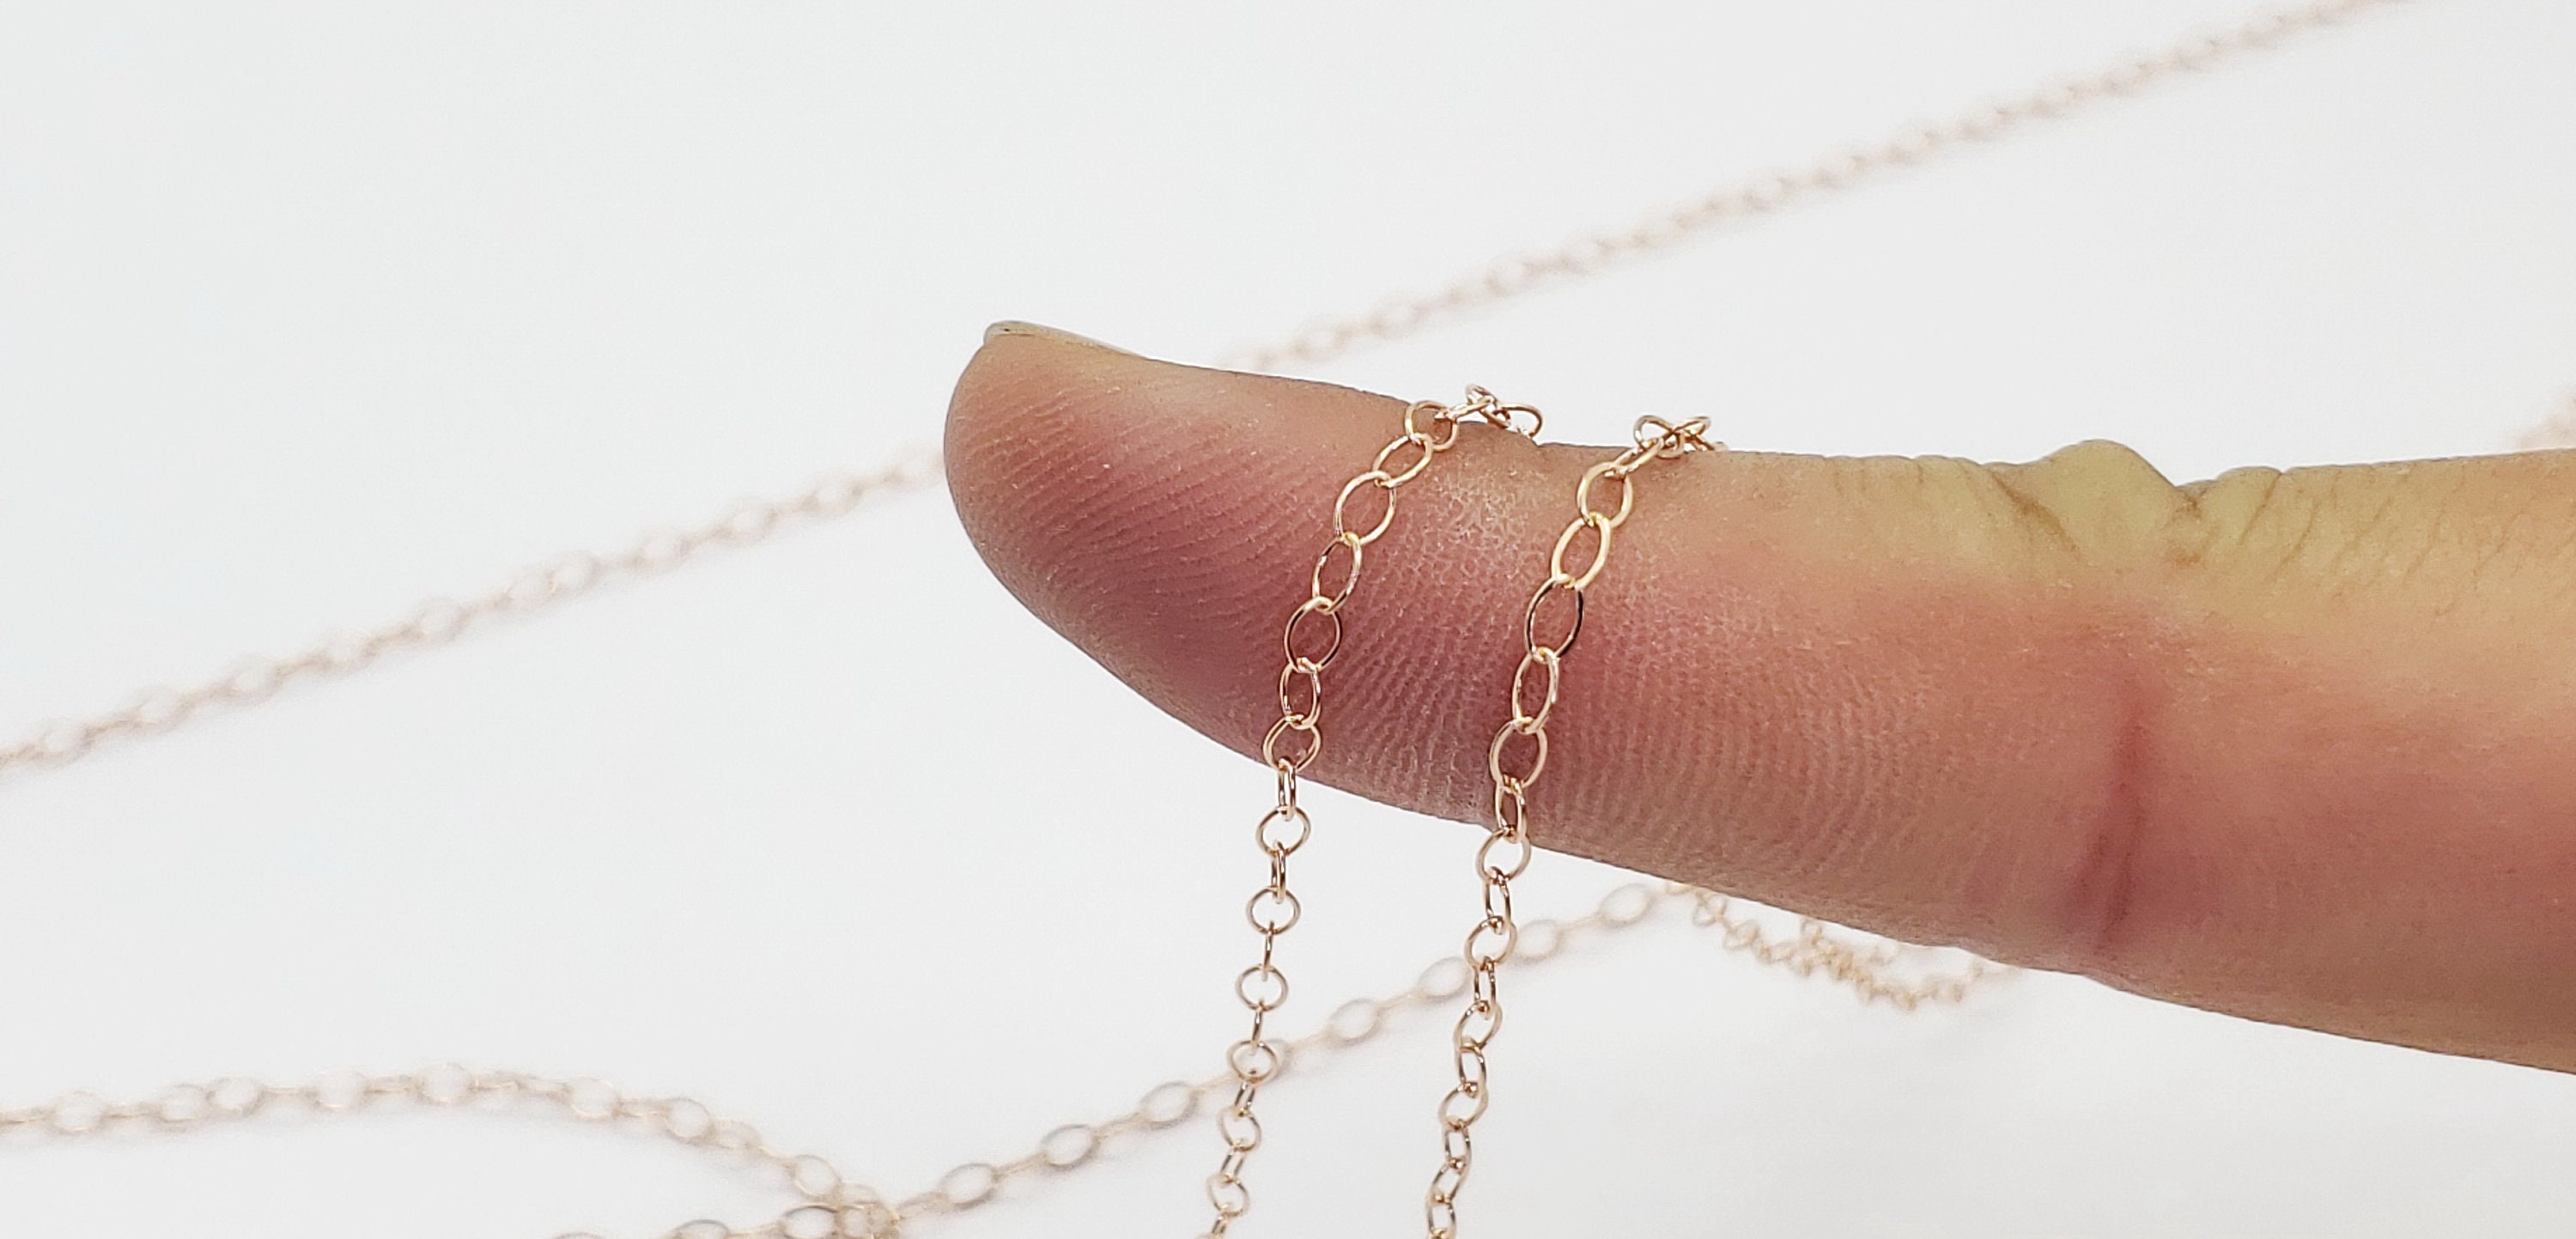 14k Gold Filled Chain 3.5x2mm Wholesale by Foot, Unfinished Gold Filled  Dainty Cable Chain Bulk, Gold Chain for Jewelry Making. V208GF 